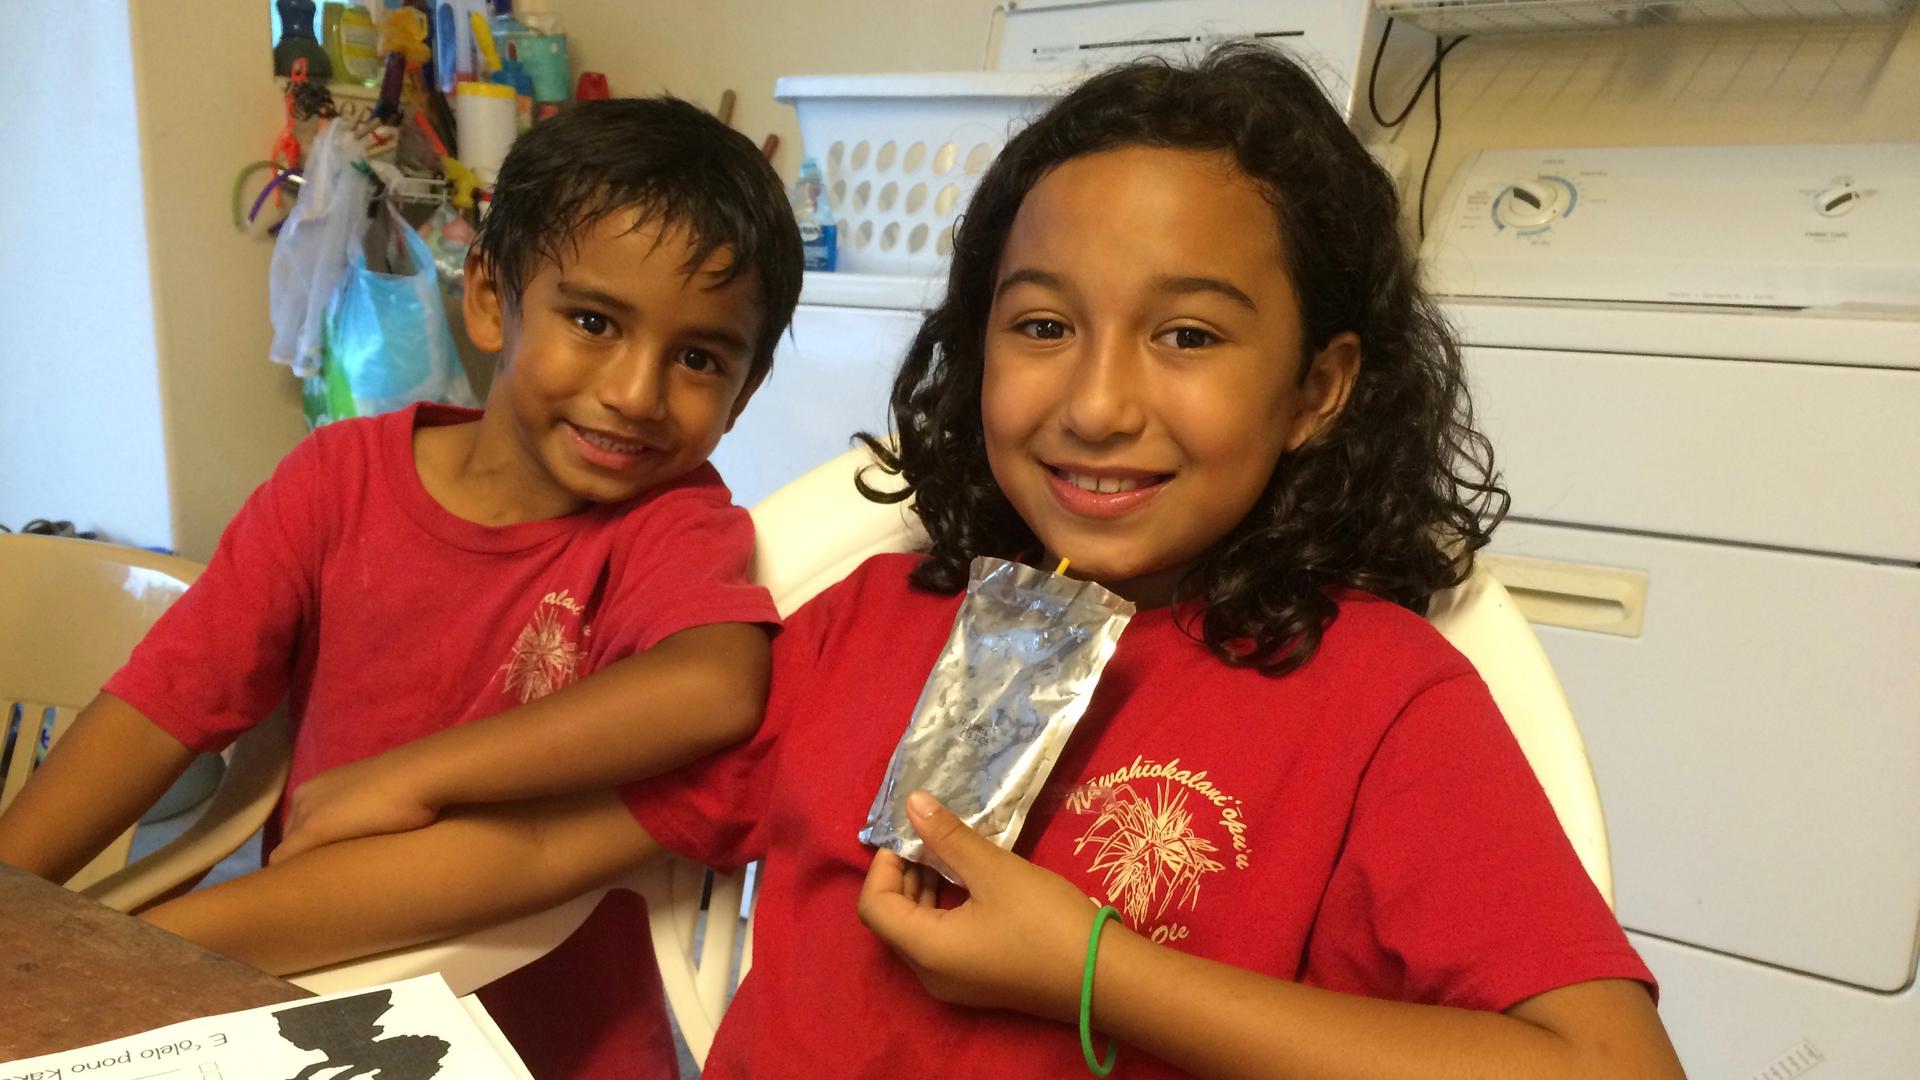 Third-grader Haveo Maka'imoku with her brother. Haveo learns entirely in Hawaiian at a school in Hilo, Hawaii. At home, she speaks Hawaiian with mother, who attended one of the first Hawaiian language pre-schools founded in the 1980s. 